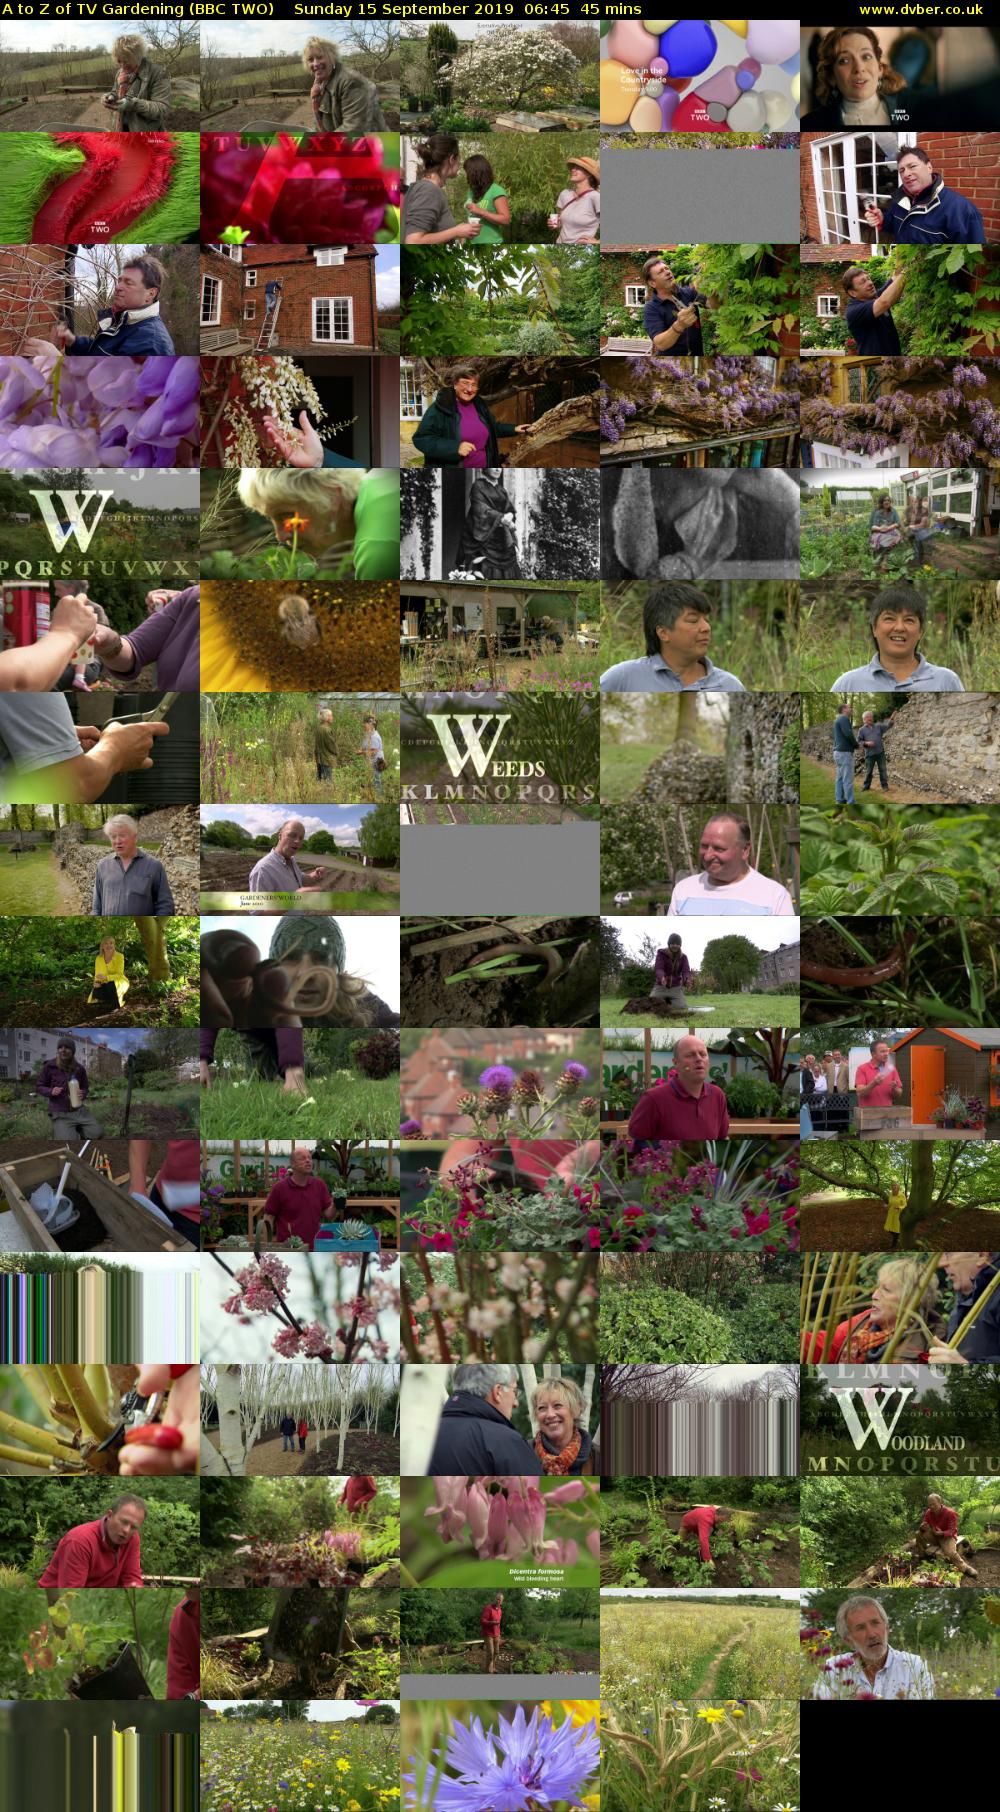 A to Z of TV Gardening (BBC TWO) Sunday 15 September 2019 06:45 - 07:30